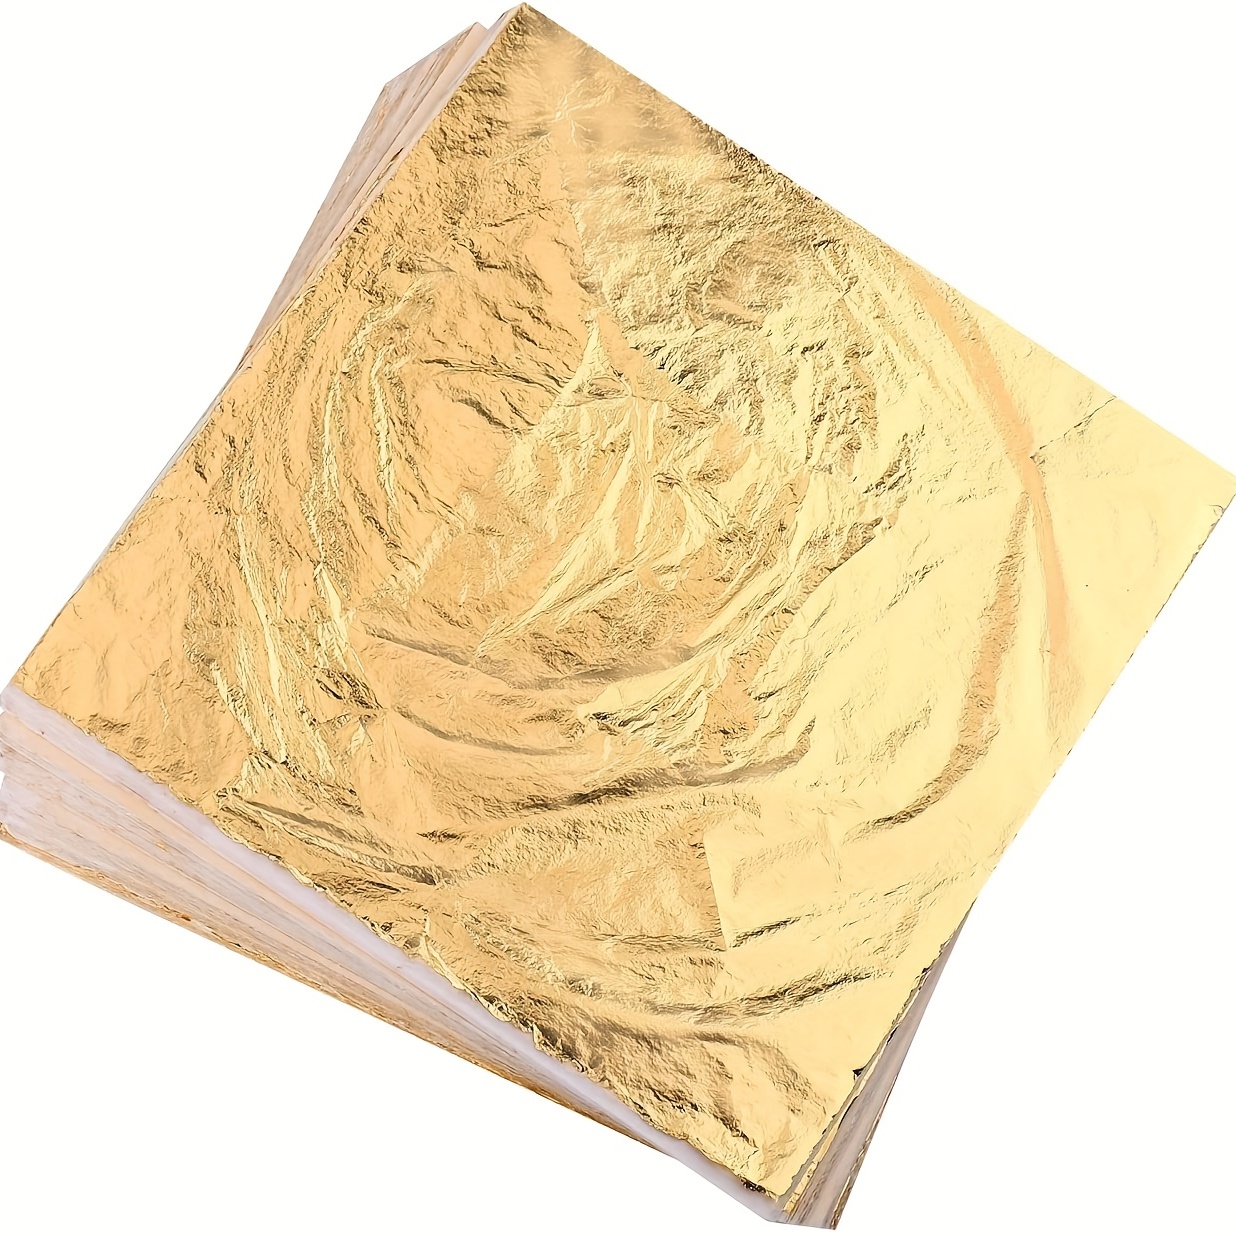 

50pcs Golden Leaf Sheets For Resin, Gold Foil Flakes Metallic Leaf For Resin Jewelry Making, Nail Art, Slime, And Gilding Crafts (golden, Rose Golden Color 5.5 By 5.5 Inches)